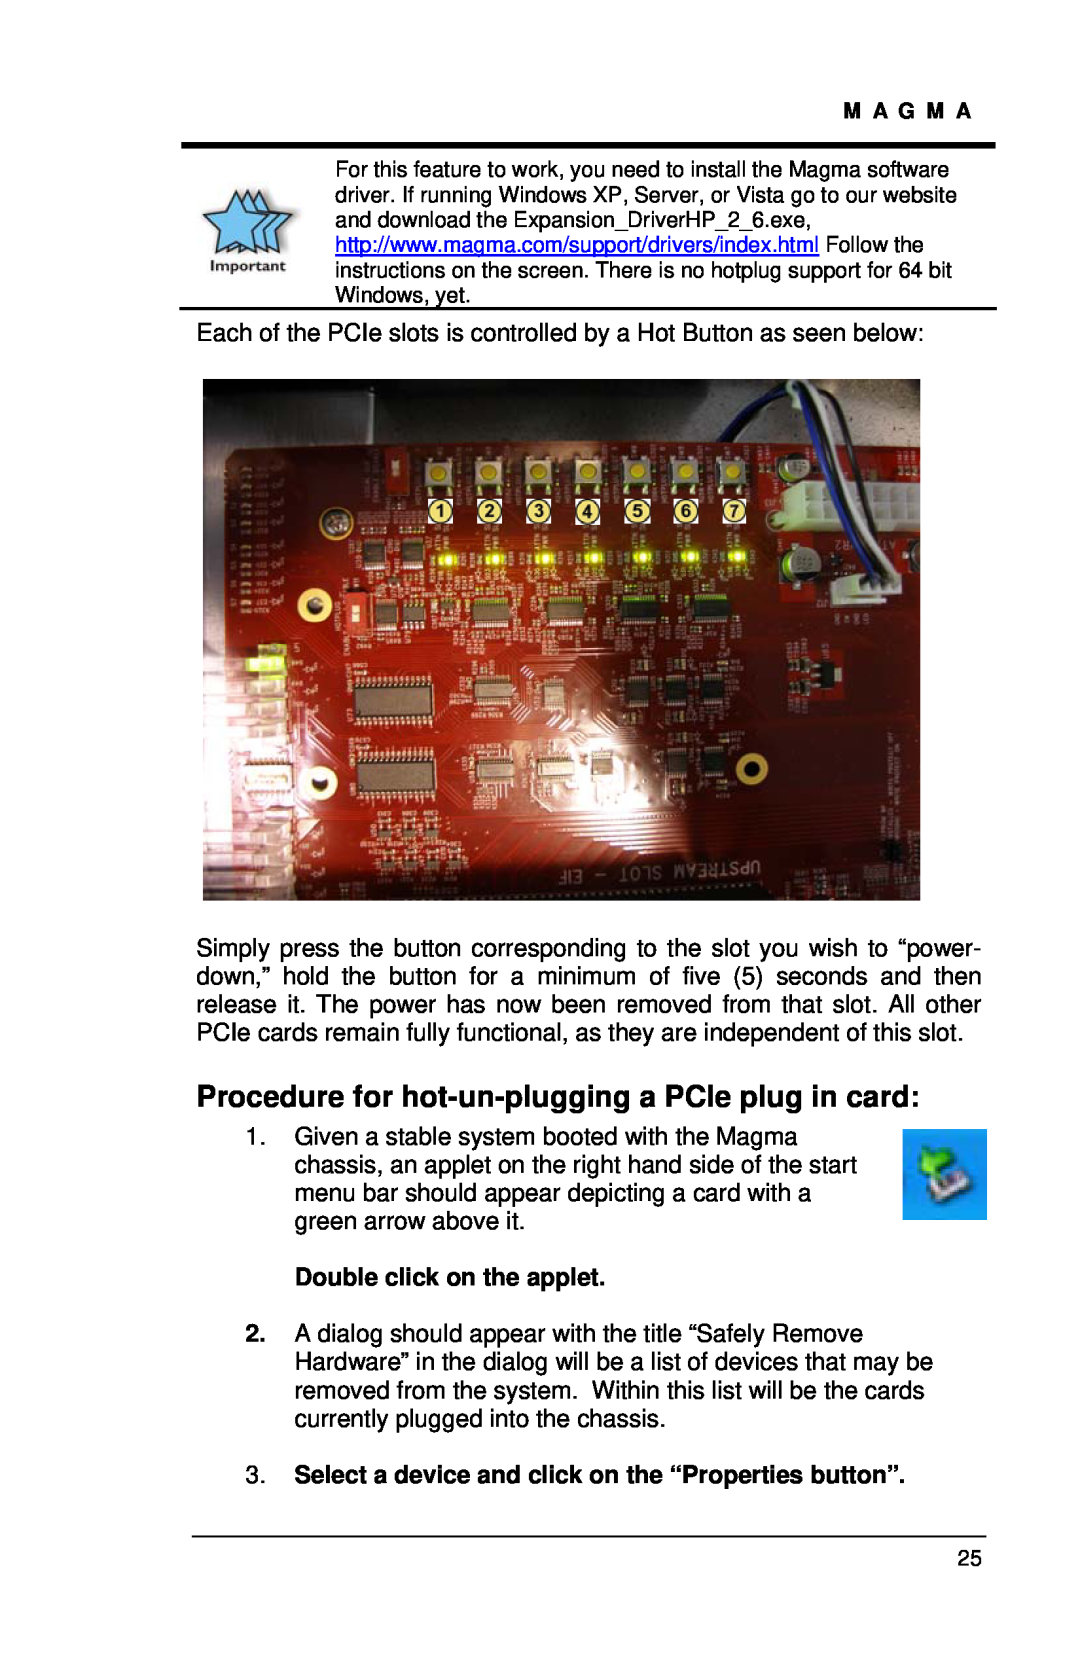 Magma EB7-x8, EB7R-x8, EBU user manual Procedure for hot-un-plugging a PCIe plug in card, Double click on the applet 